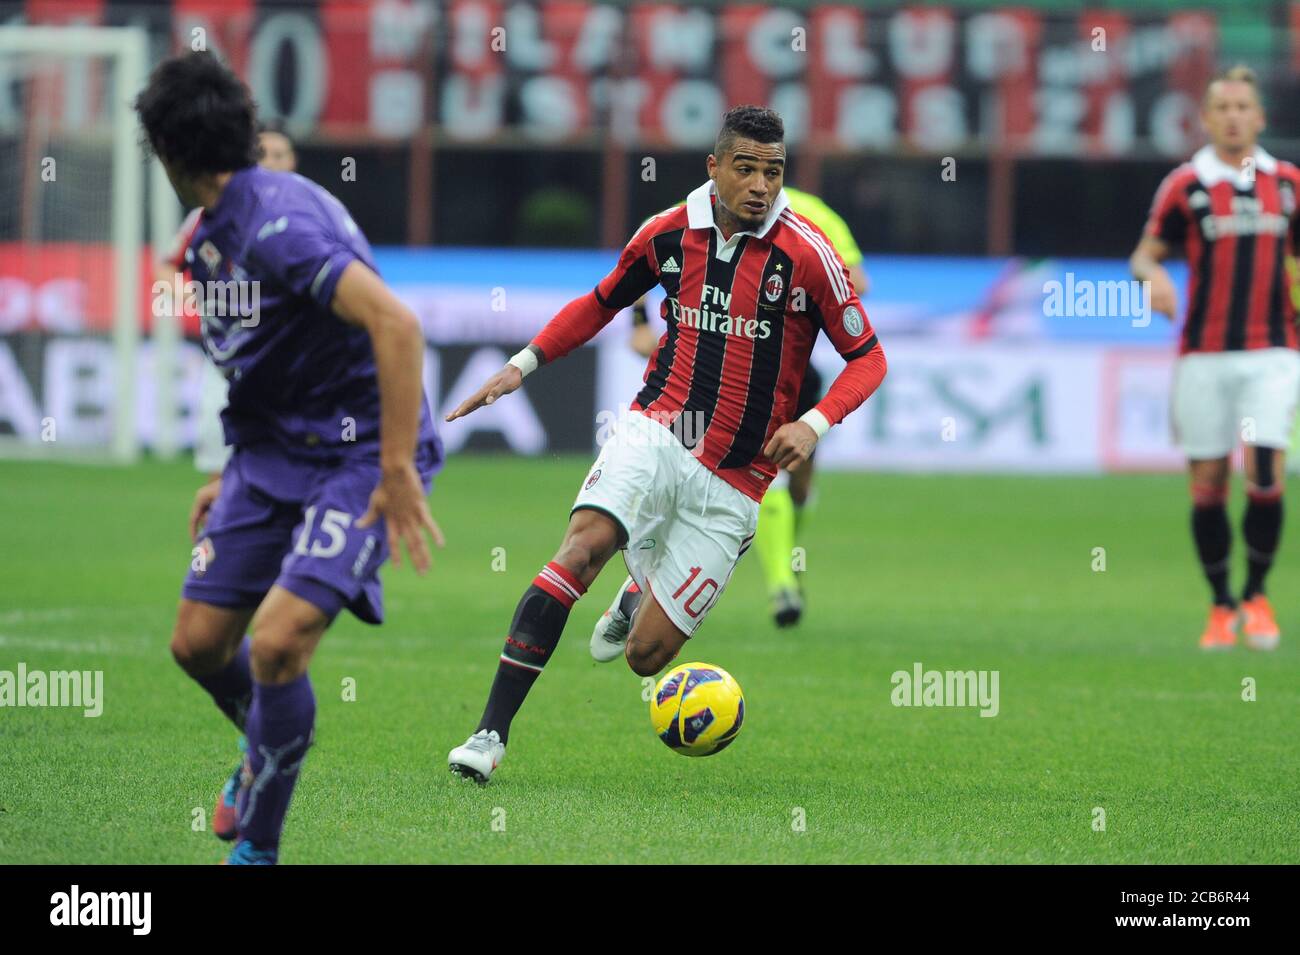 Milan  Italy, 11 November 2012, 'G.MEAZZA SAN SIRO ' Stadium, Serious Football Championship A 2012/2013, AC Milan - AC Fiorentina   : Kevin Prince Boateng in action during the match Stock Photo